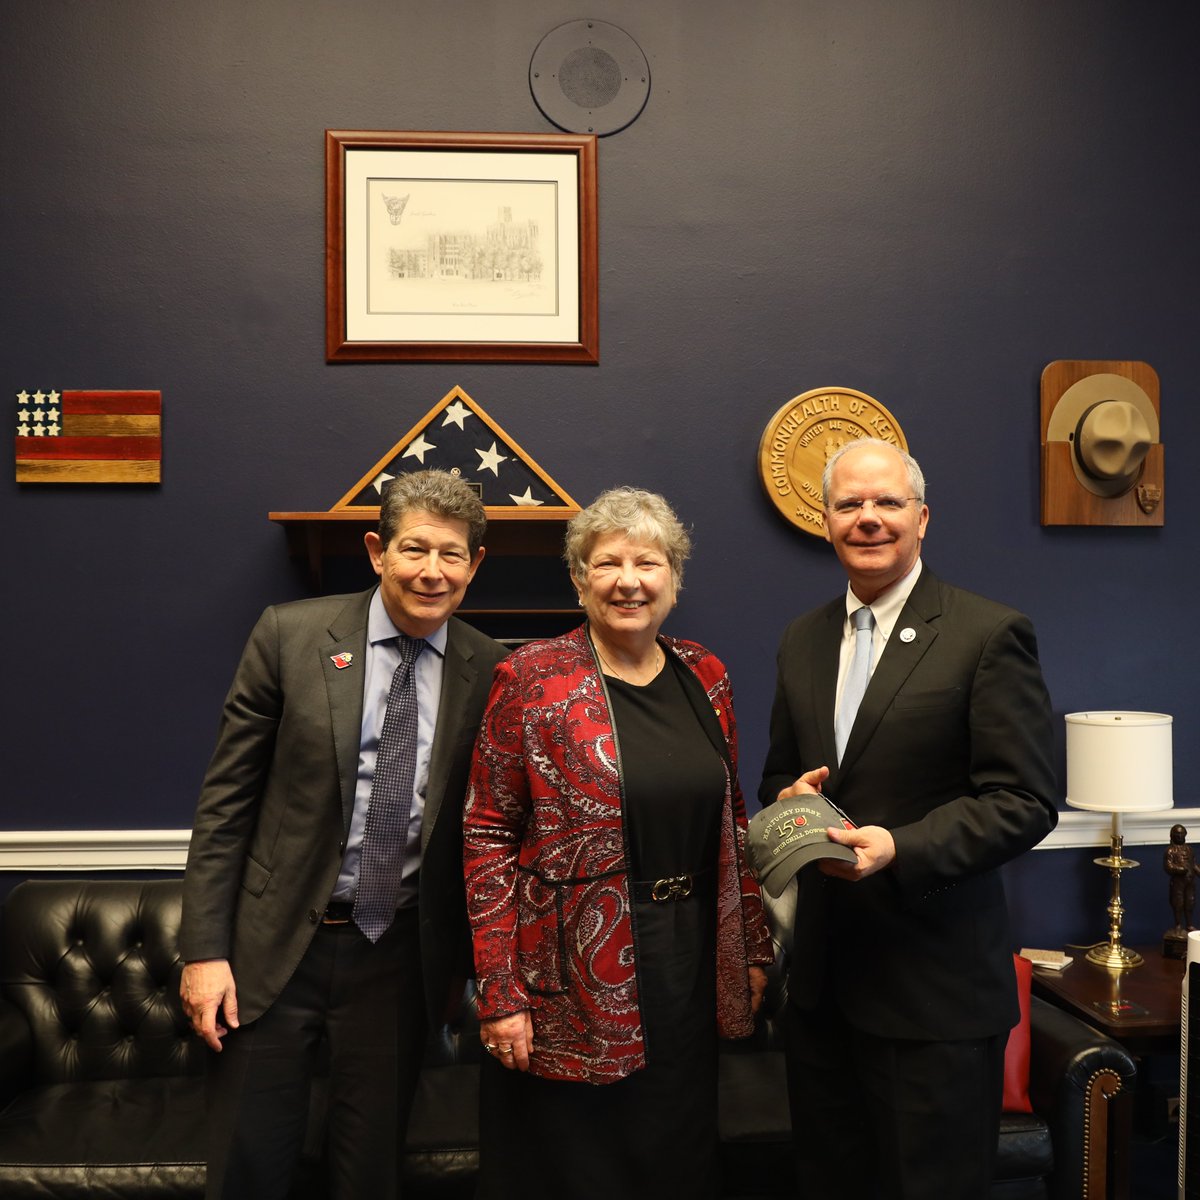 This week I met with the President of @uofl Dr. Kim Schatzel and Dr. Jon Klein, to talk about how they’re working to fulfill their mission to educate our next generation and how @housecommerce is working to solve outstanding issues surrounding Name, Image, and Likeness with…